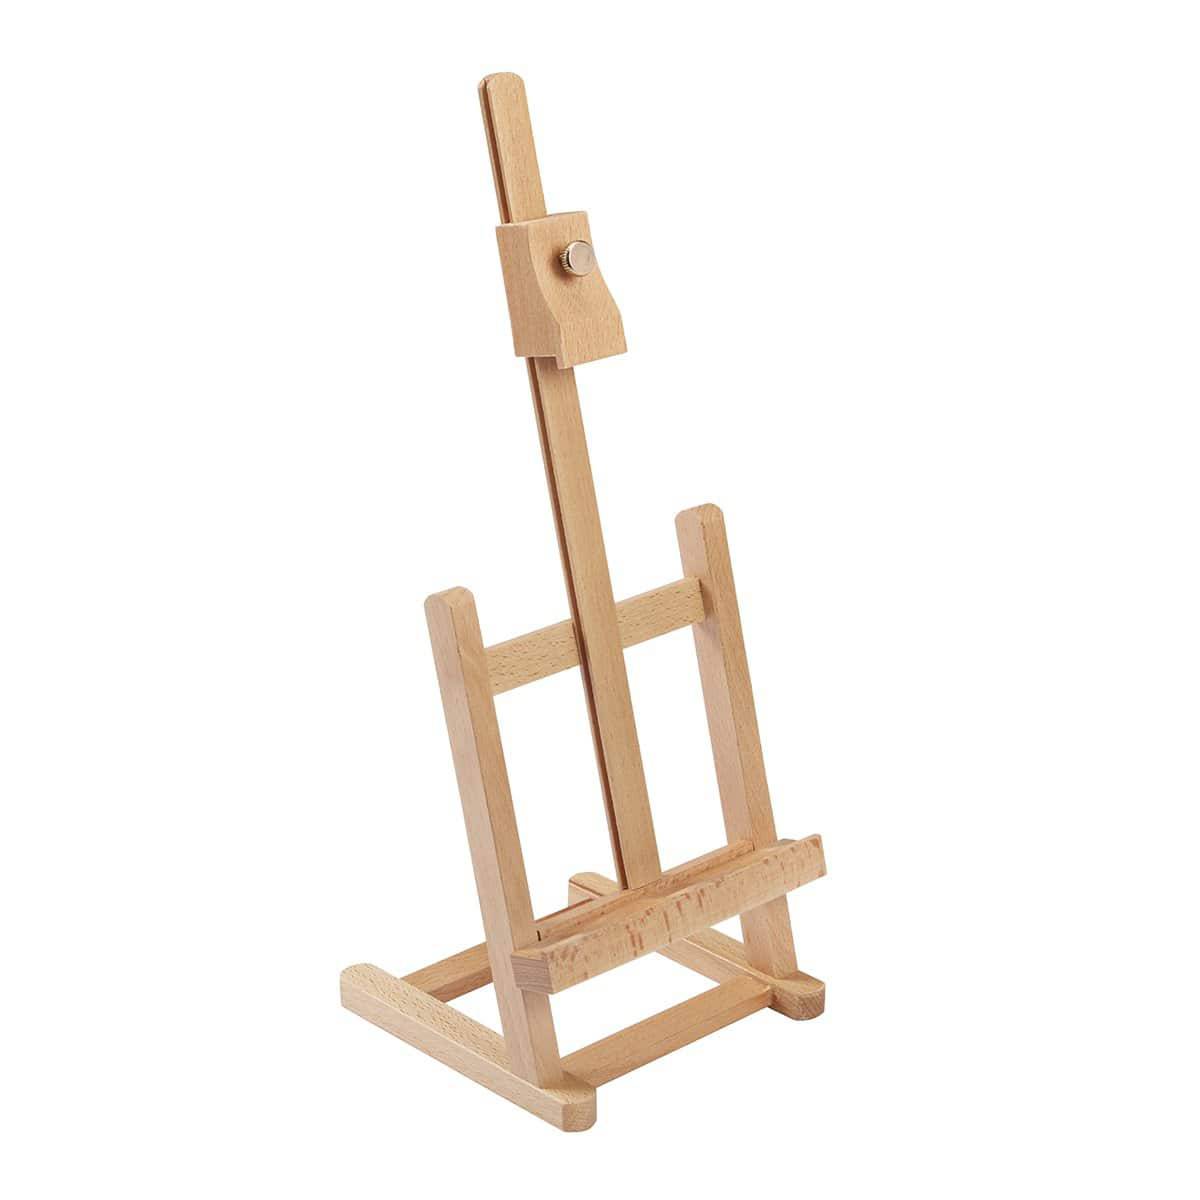 U.S. Art Supply 10.5 Small Tabletop Display Stand A-Frame Artist